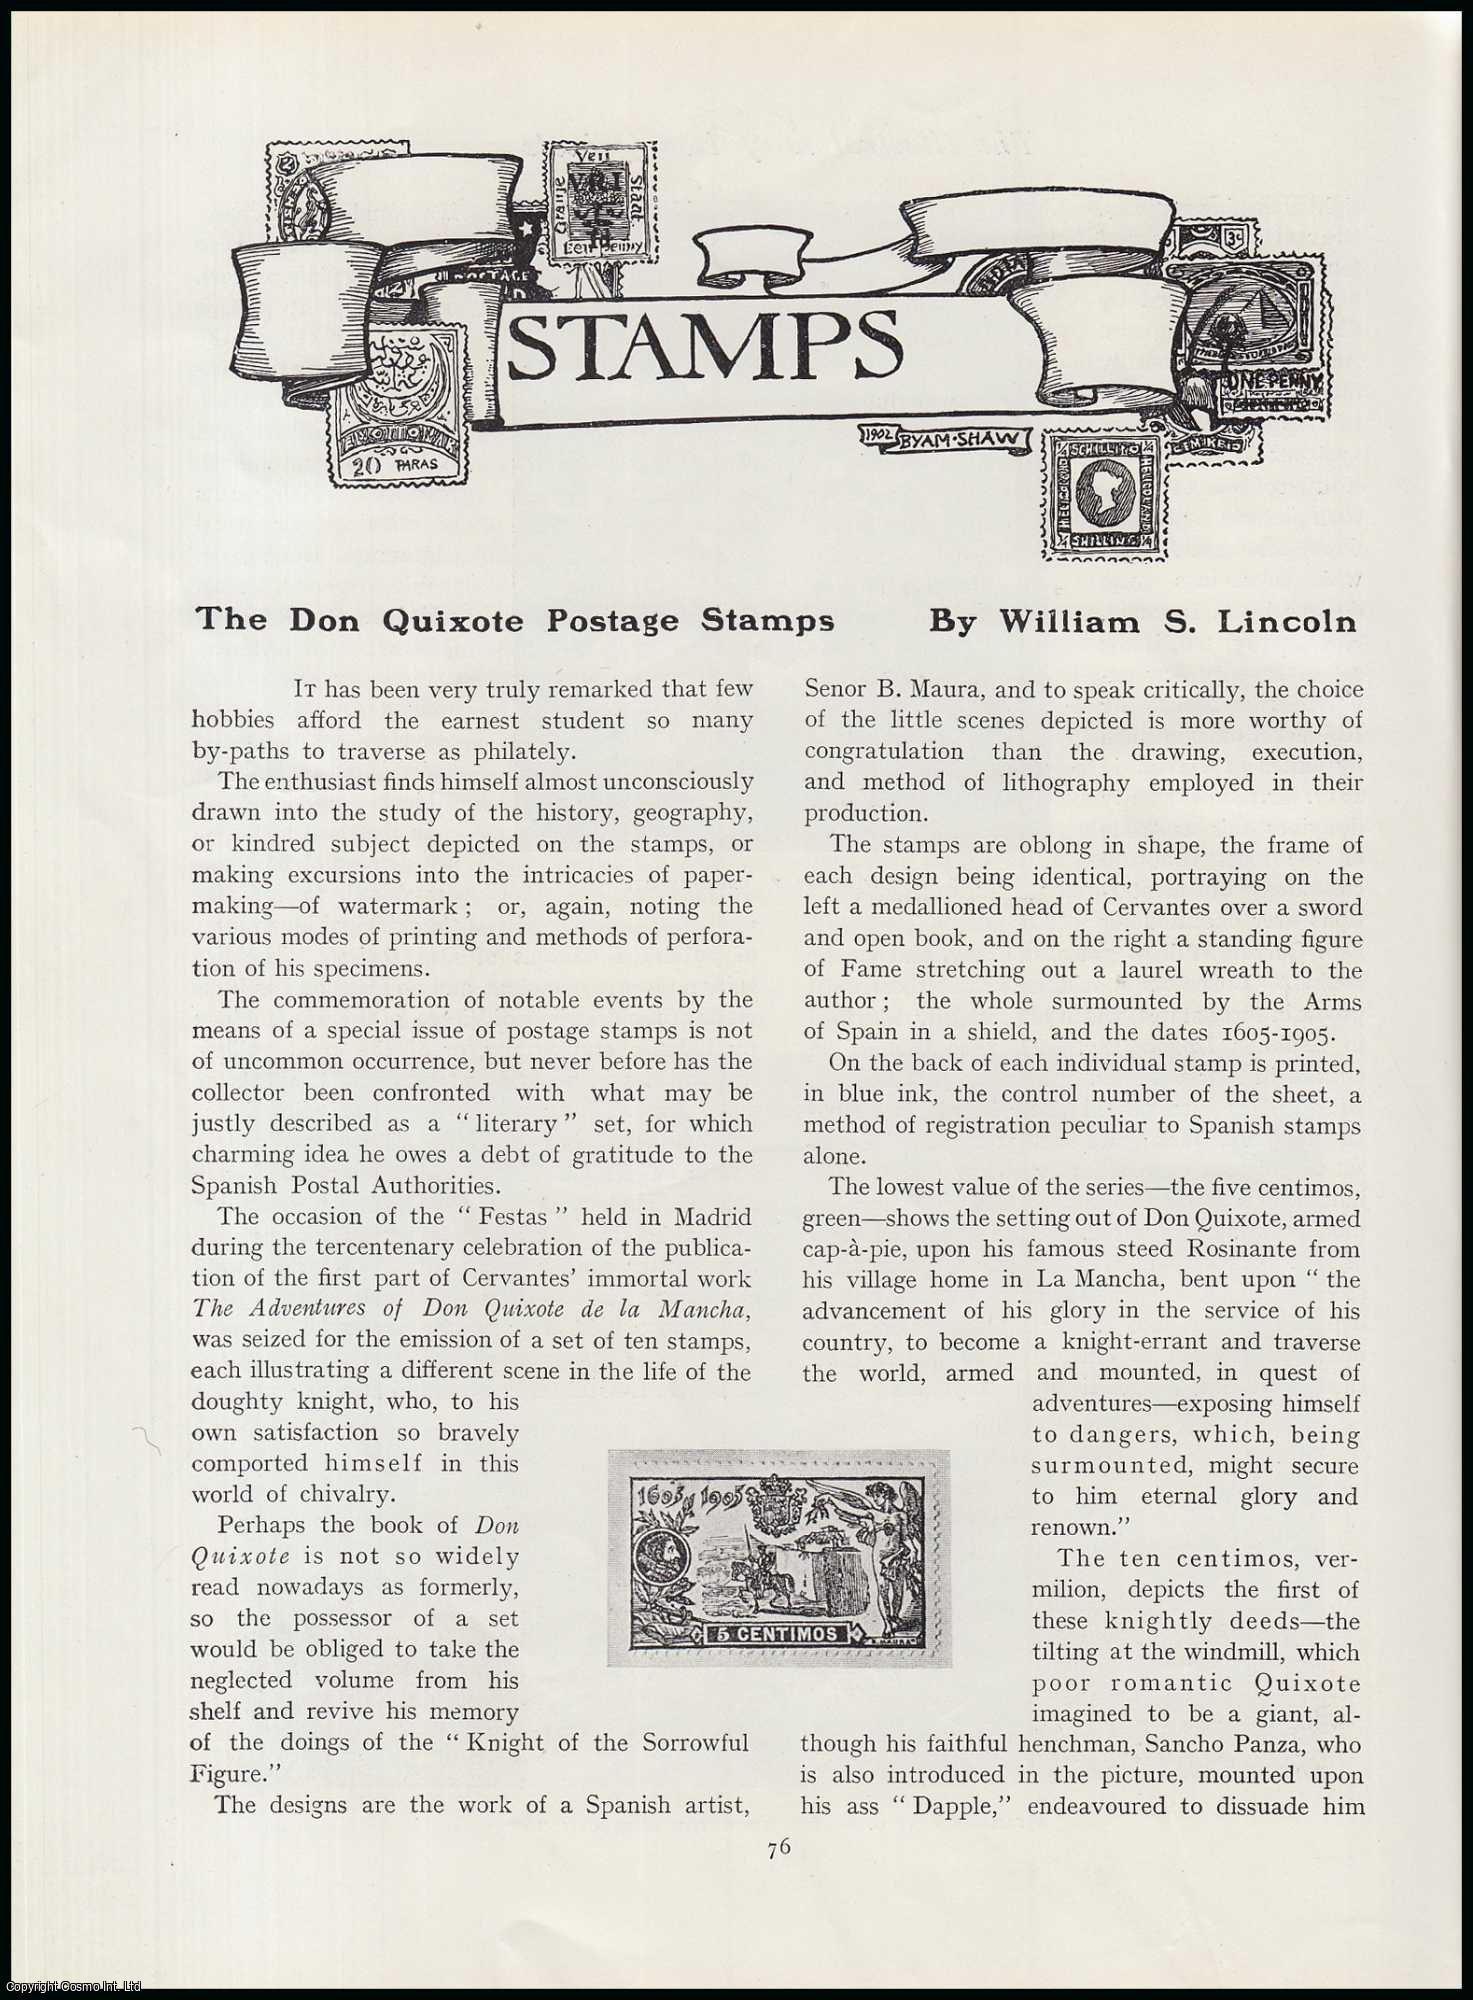 William S. Lincoln - The Don Quixote Postage Stamps. An original article from The Connoisseur, 1905.